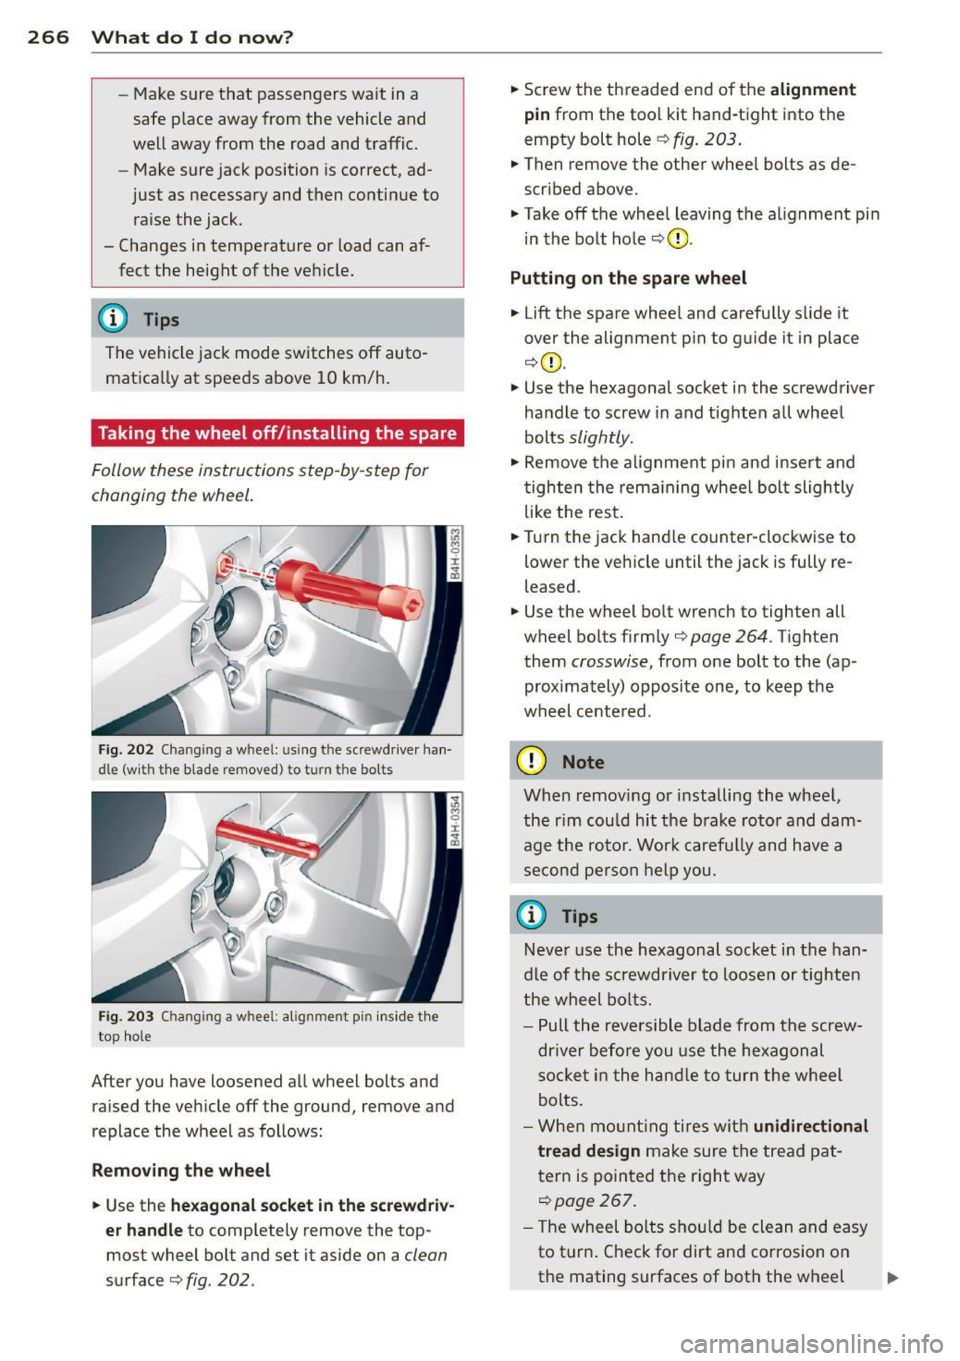 AUDI S8 2011  Owners Manual 266  What  do I do  now ? 
-Make sure  that  passengers  wait  in a 
safe  p lace  away from  the  vehicle  and 
well  away from  the  road  and  traffic. 
- Make sure jack  position  is  correct,  ad